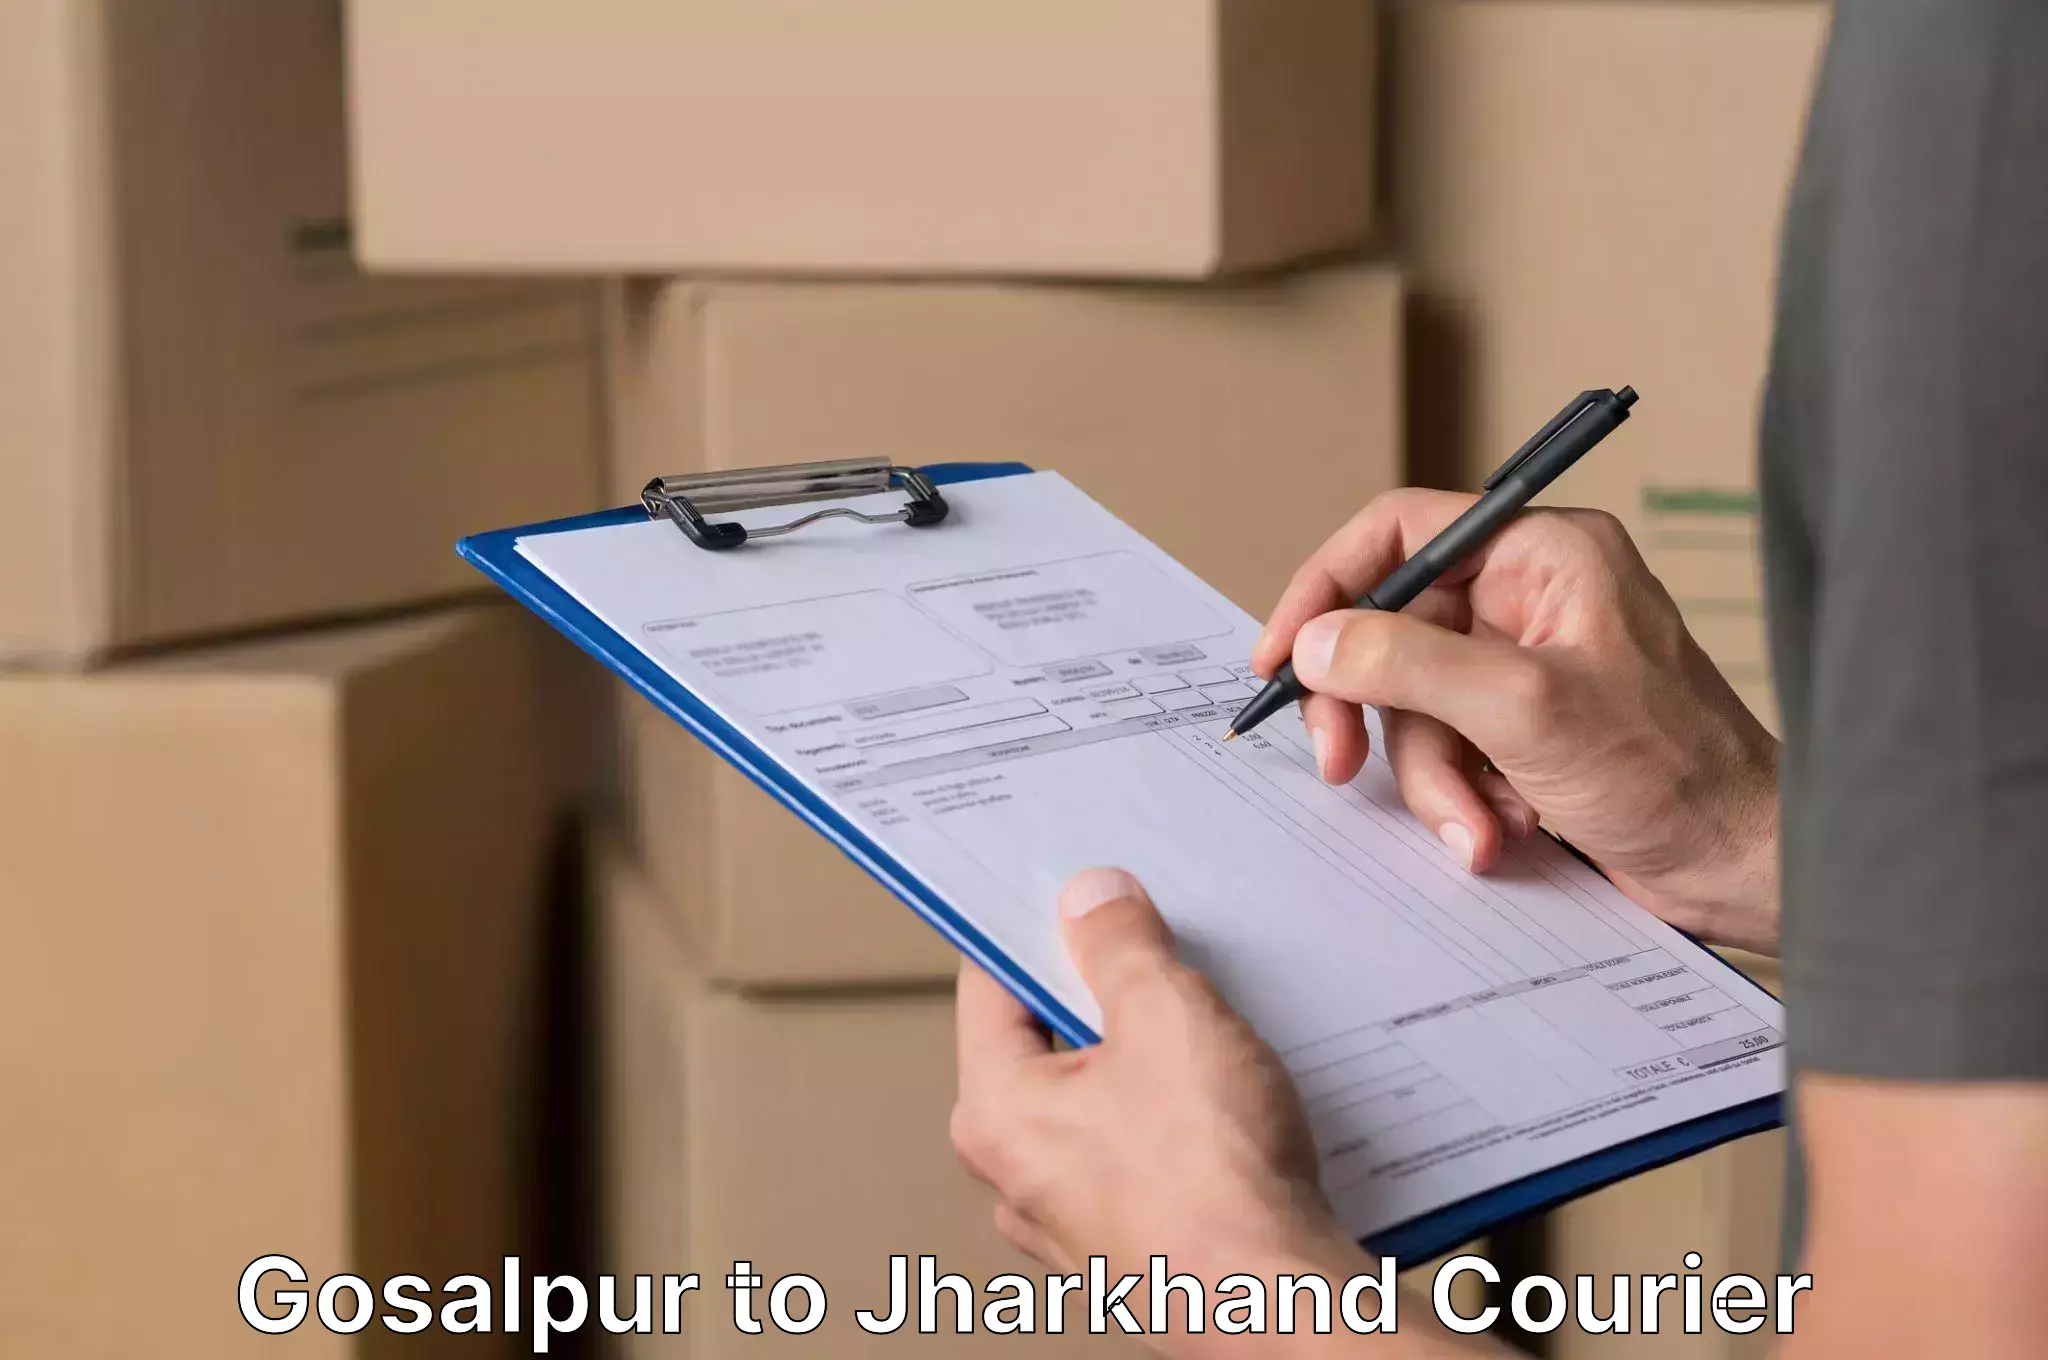 Affordable moving services in Gosalpur to Chandil